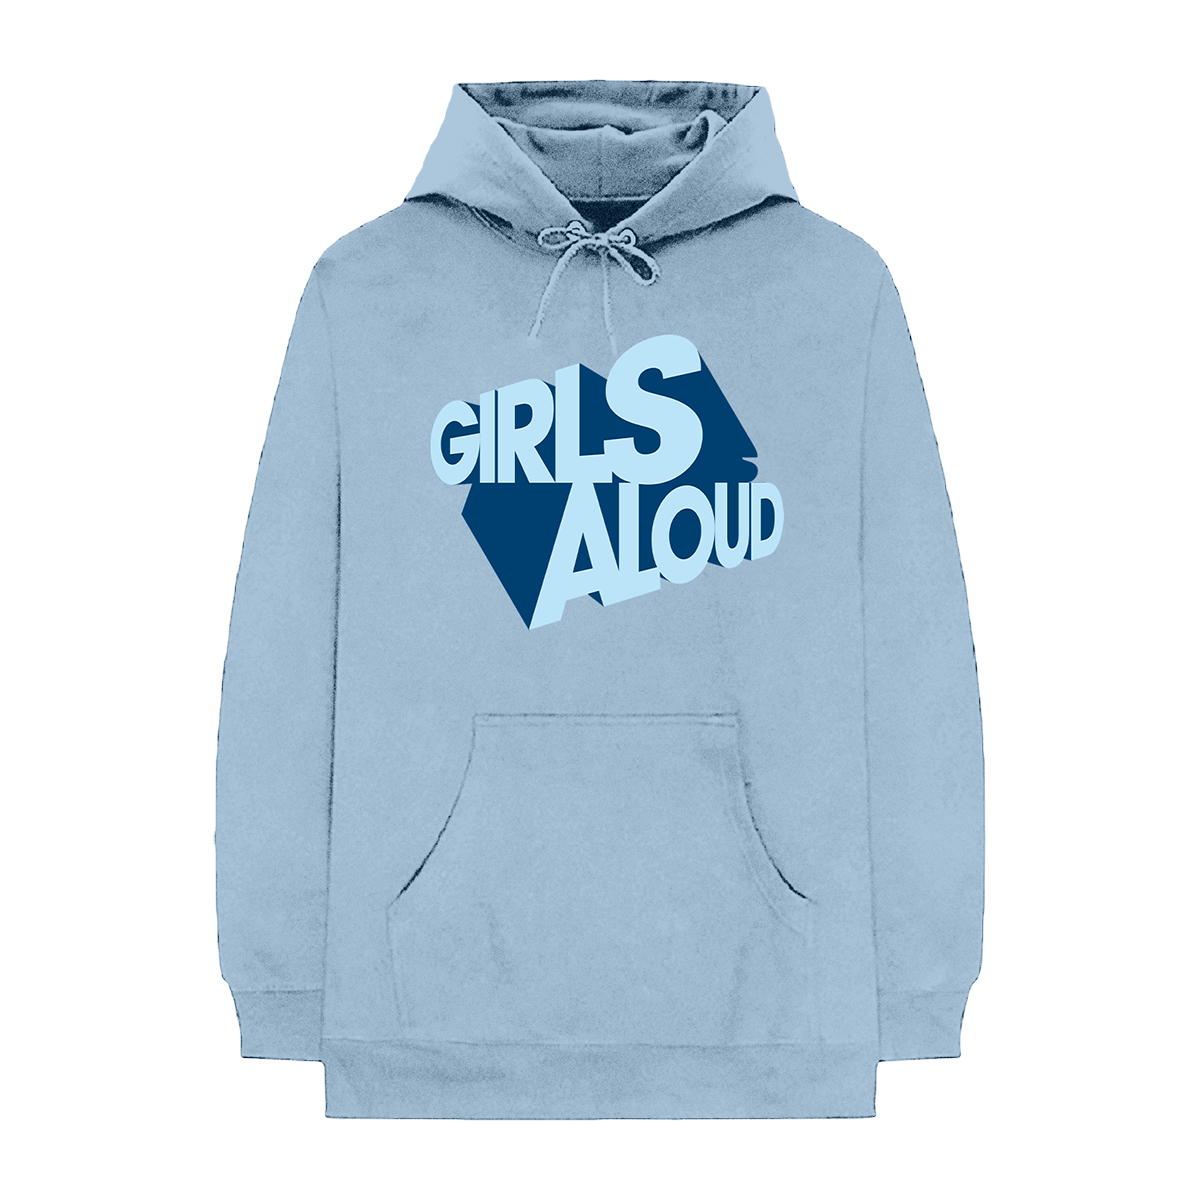 What Will The Neighbours Say? Sky Blue Vinyl & Logo Hoodie